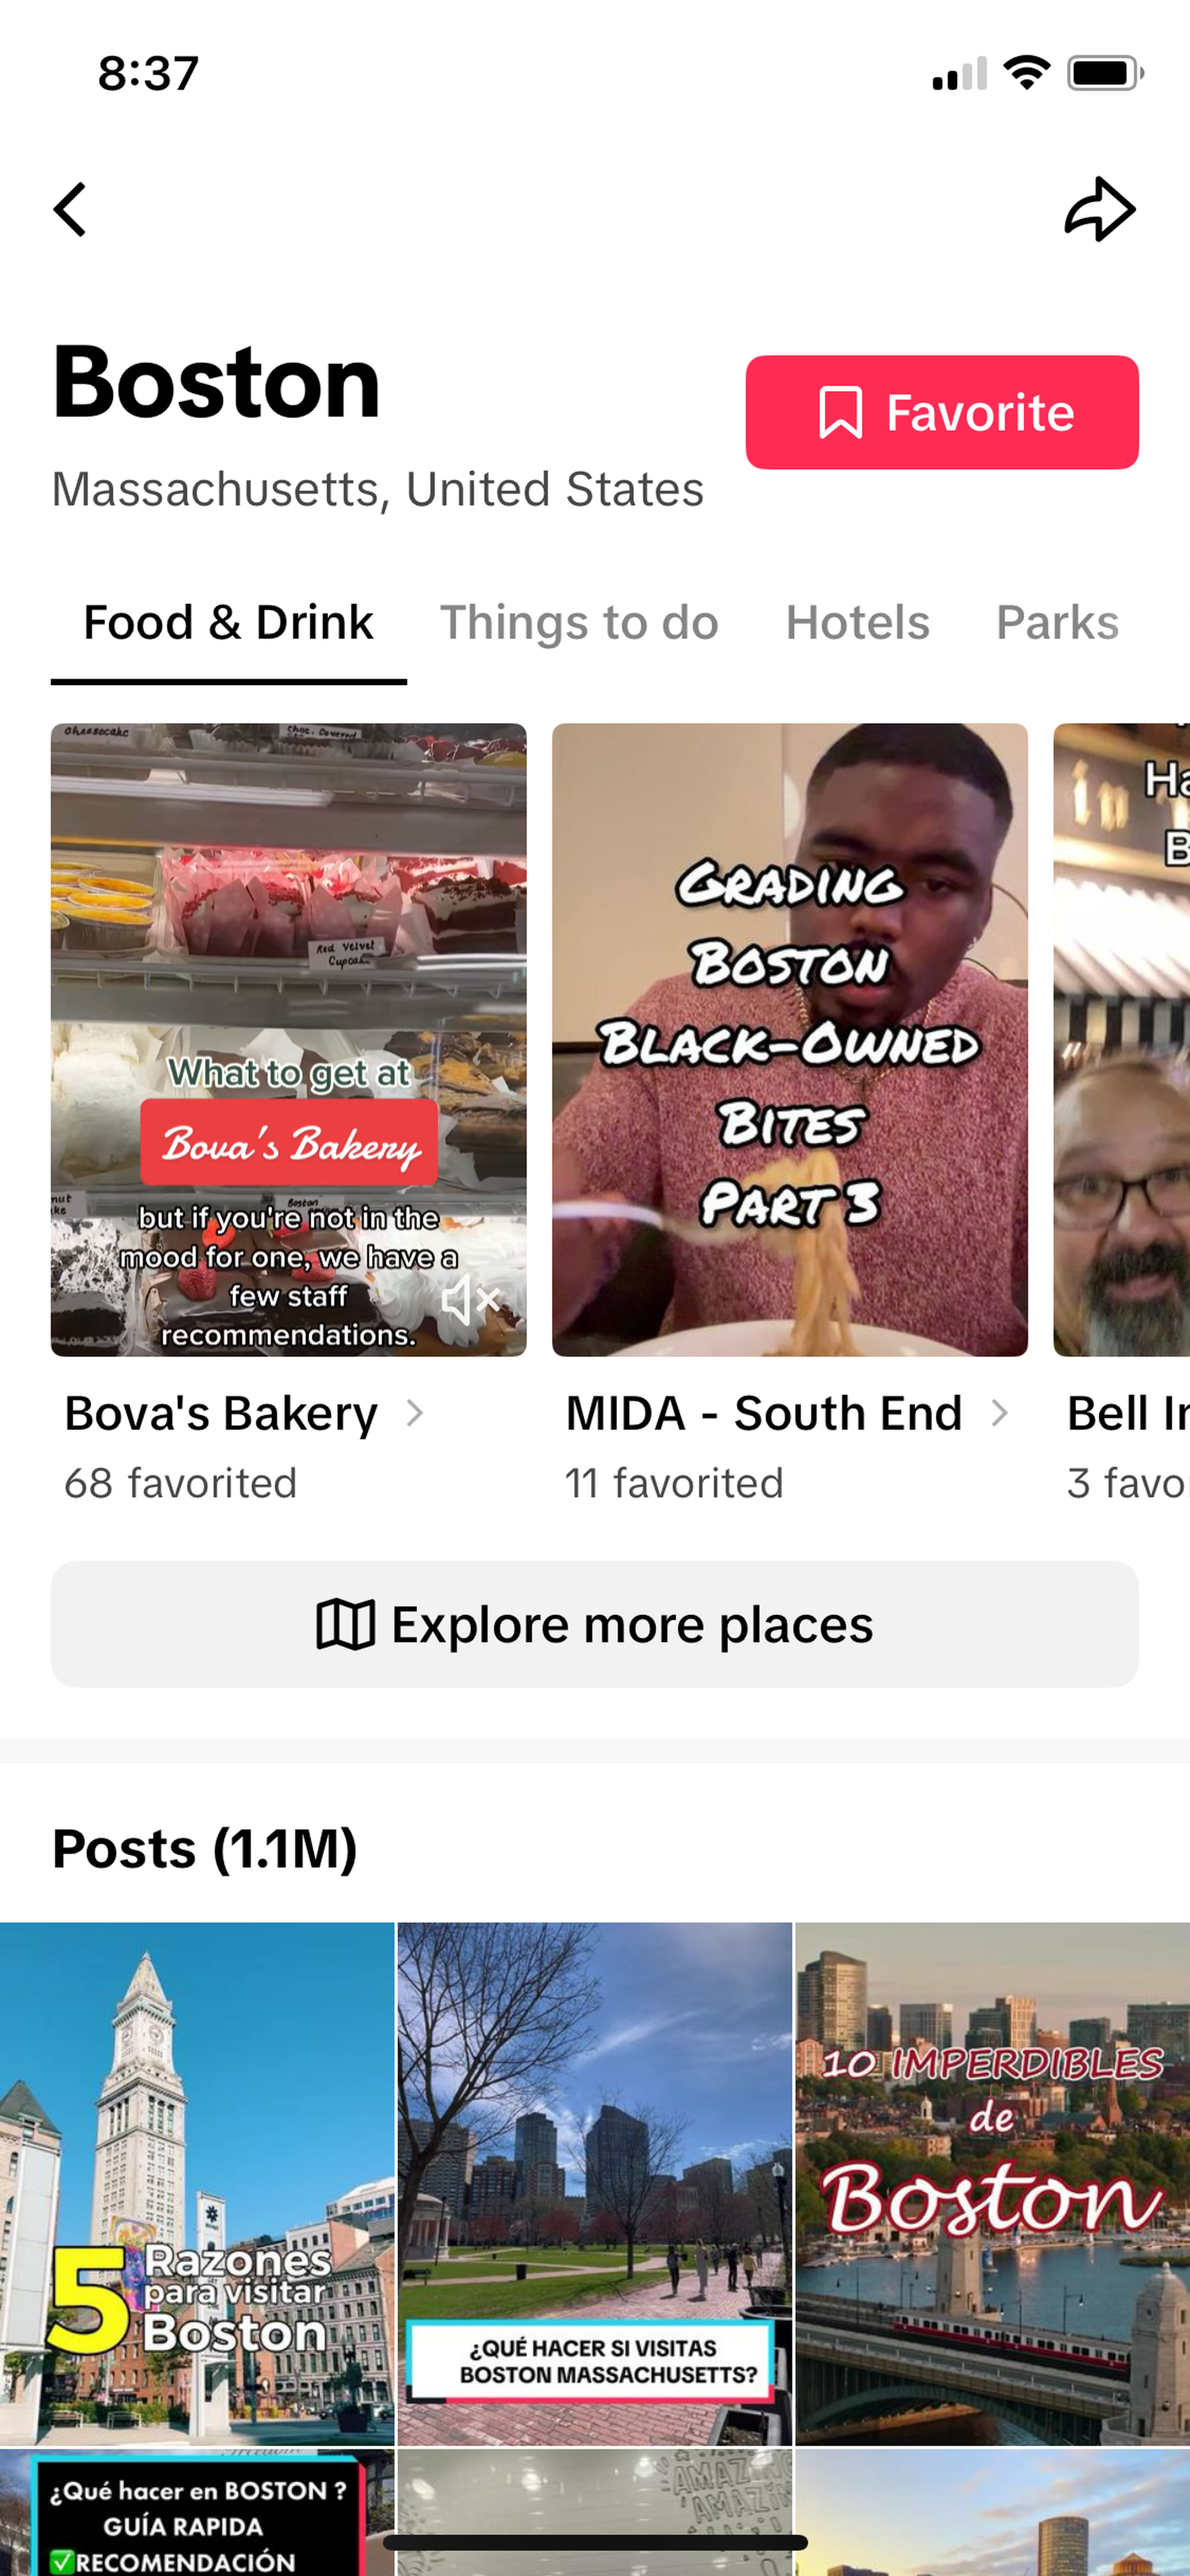 TikTok page for “Boston” geolocation, showing categories like hotels and shopping, with videos underneath.